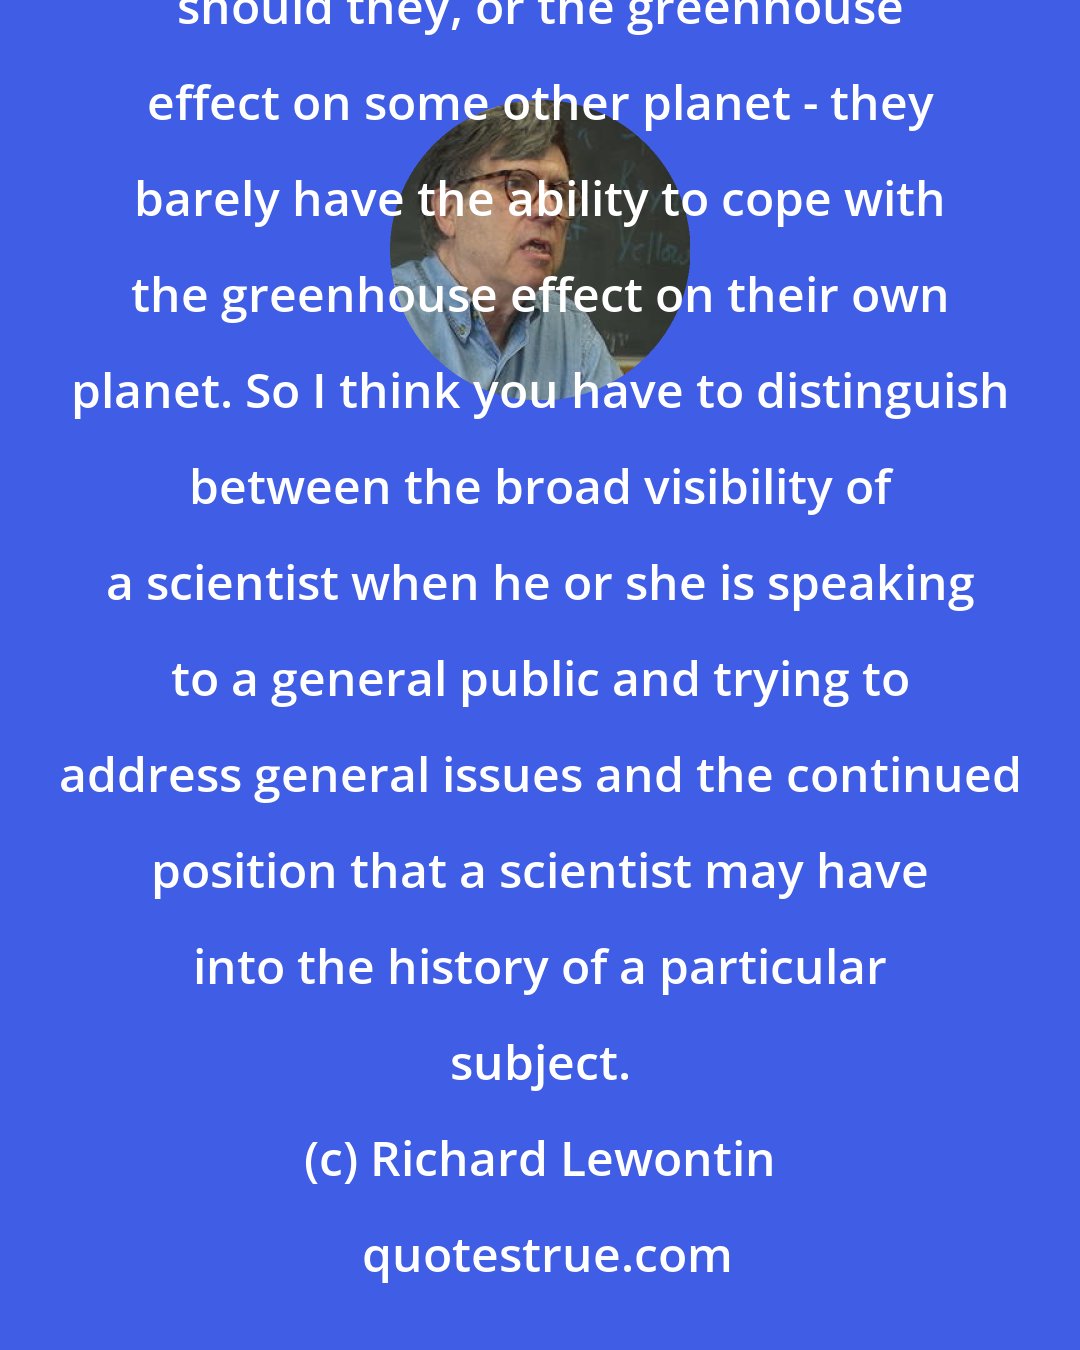 Richard Lewontin: The general public doesn't know and probably doesn't care about punctuated equilibria nor indeed should they, or the greenhouse effect on some other planet - they barely have the ability to cope with the greenhouse effect on their own planet. So I think you have to distinguish between the broad visibility of a scientist when he or she is speaking to a general public and trying to address general issues and the continued position that a scientist may have into the history of a particular subject.